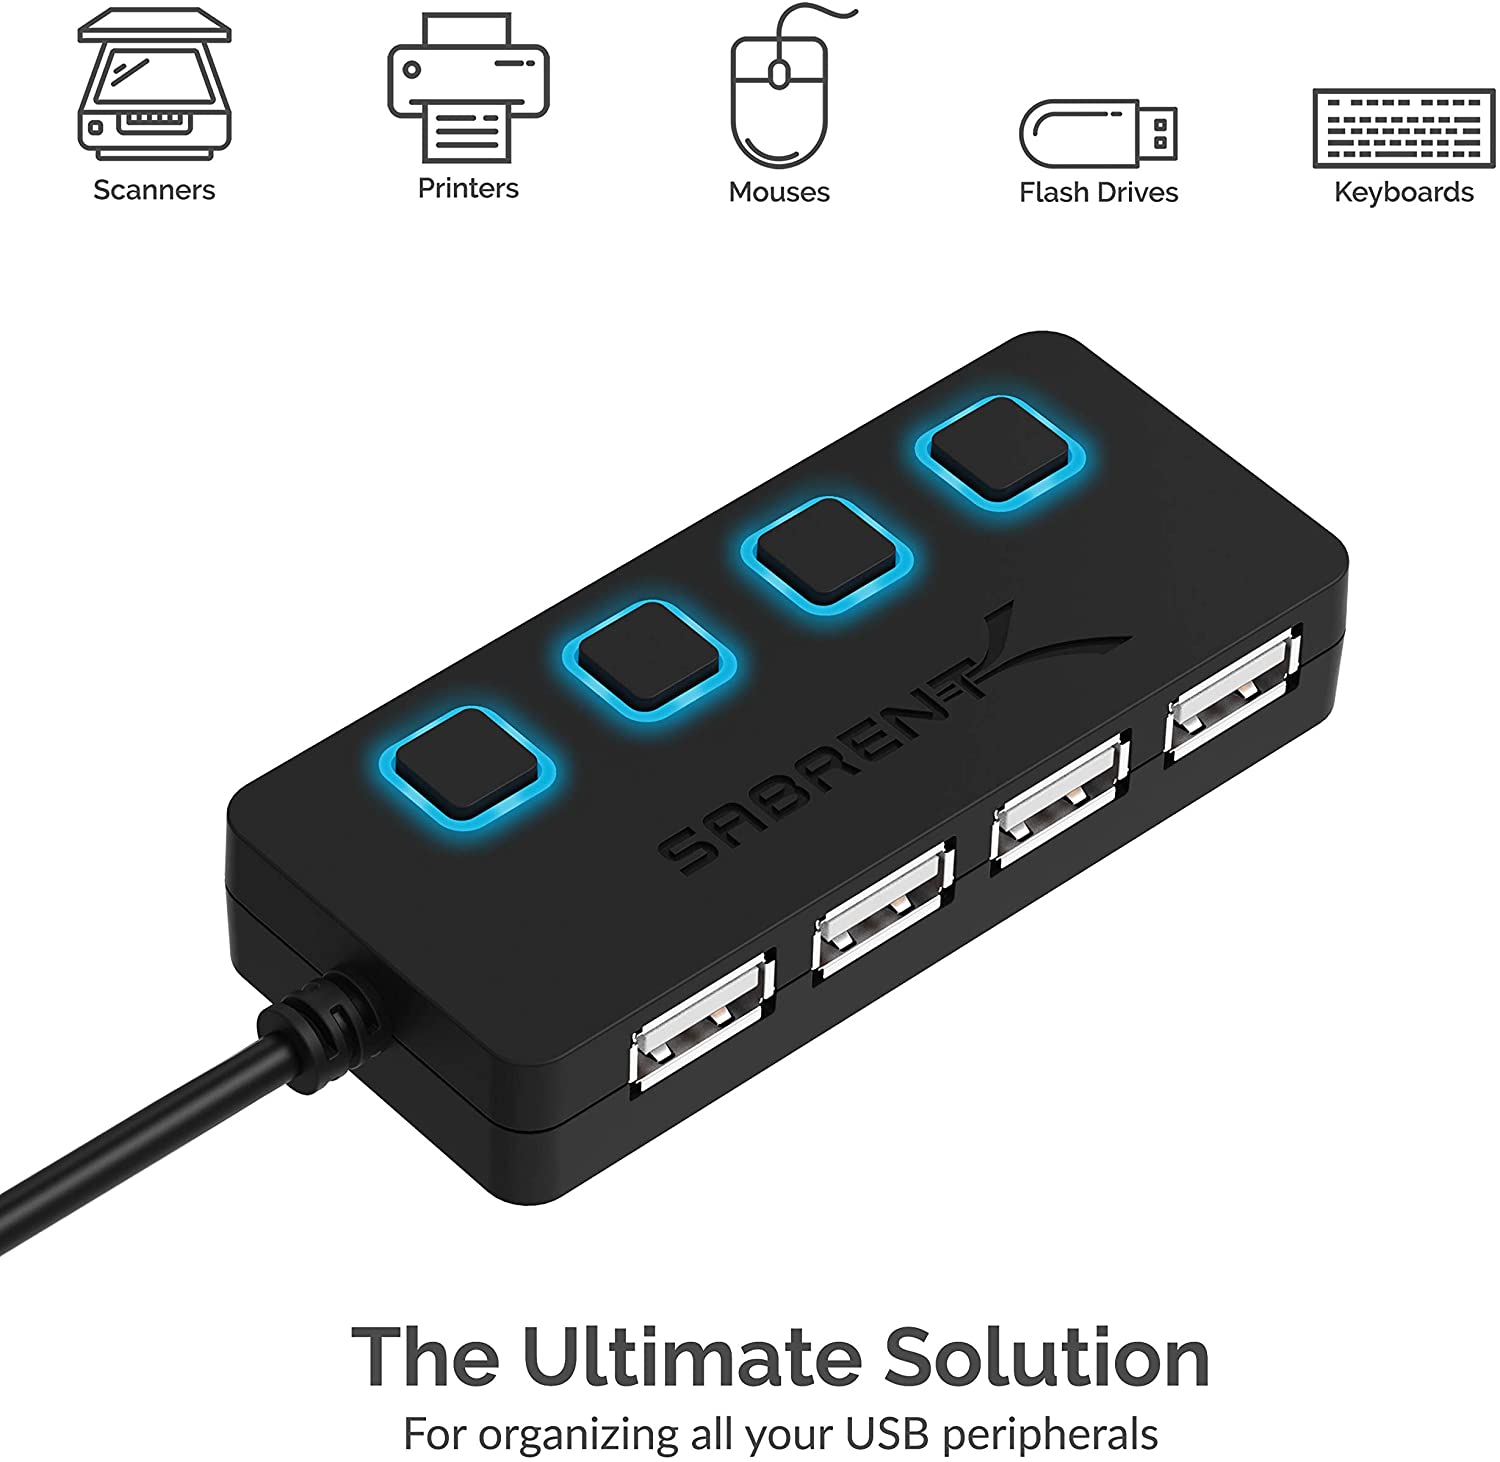 4-Port USB 2.0 Hub with Individual LED lit Power Switches (HB-UMLS)